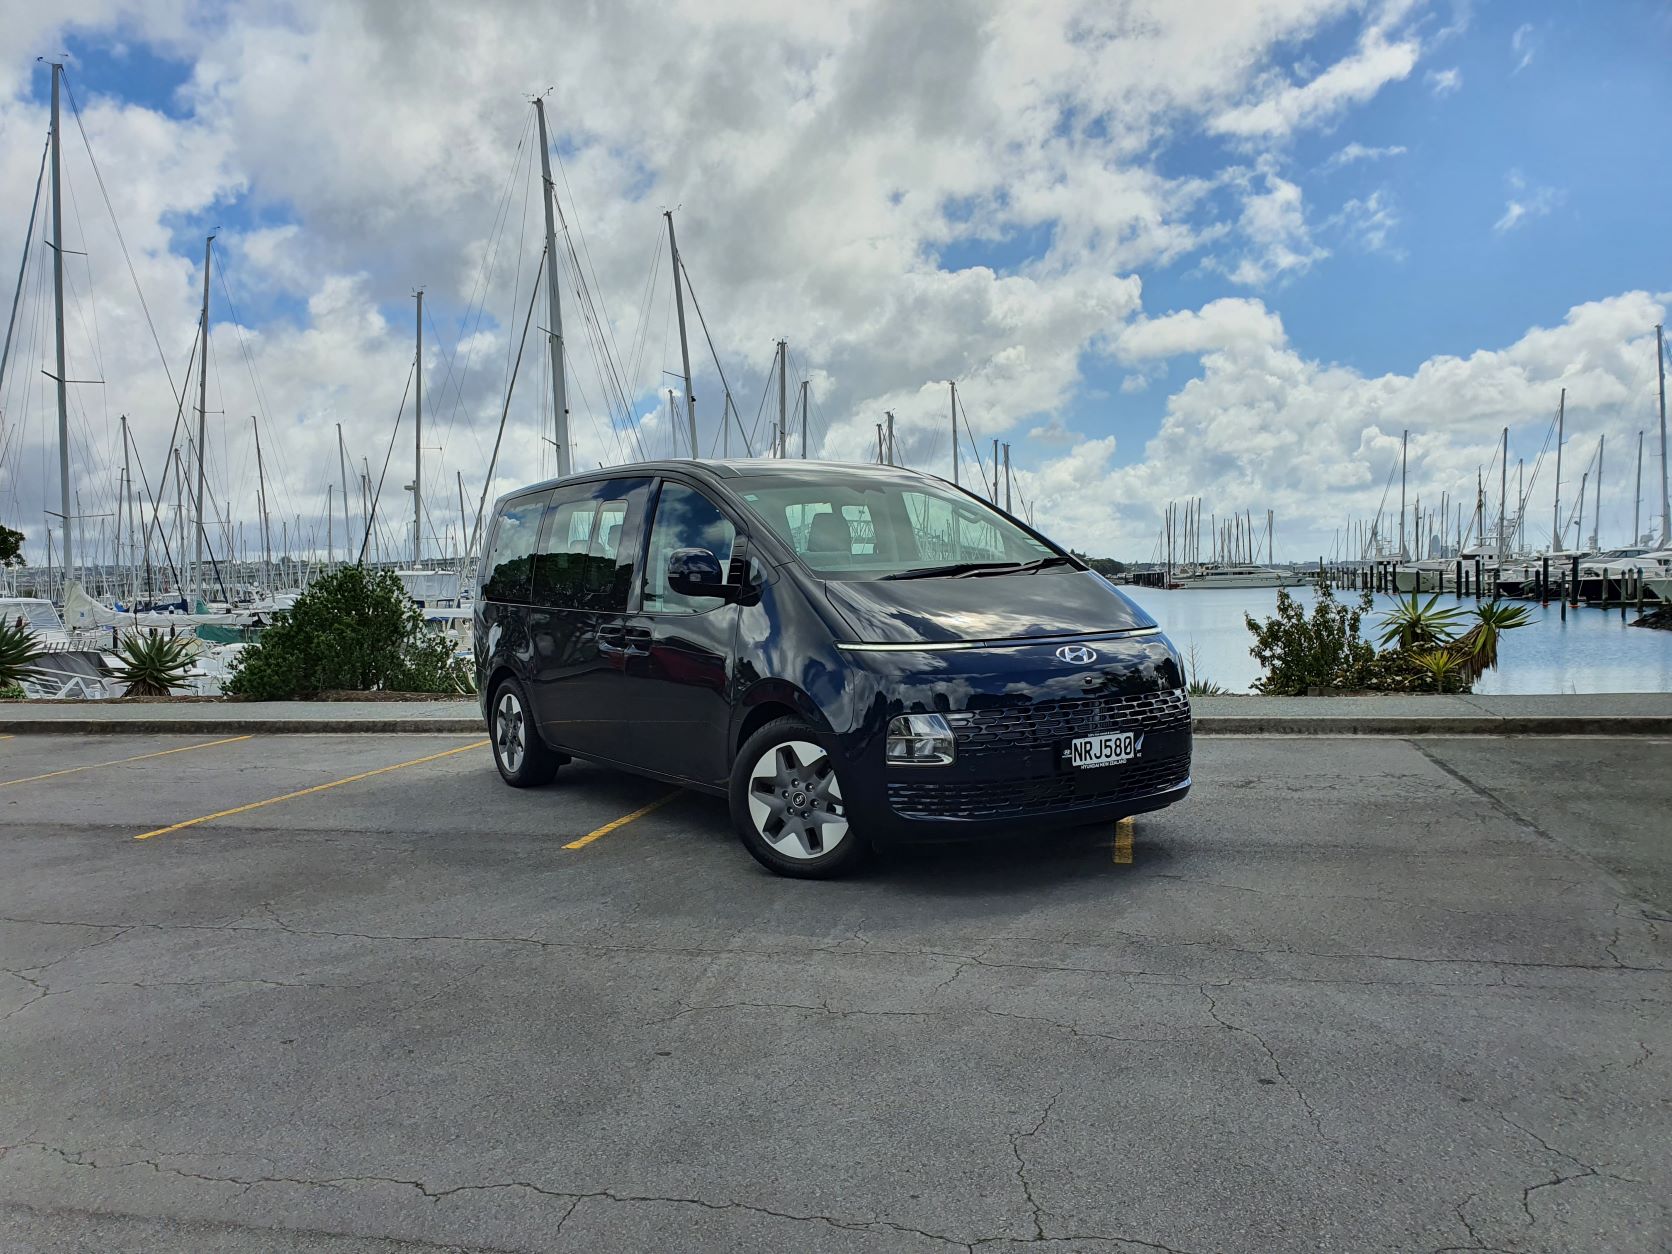 New Hyundai Staria by the harbour